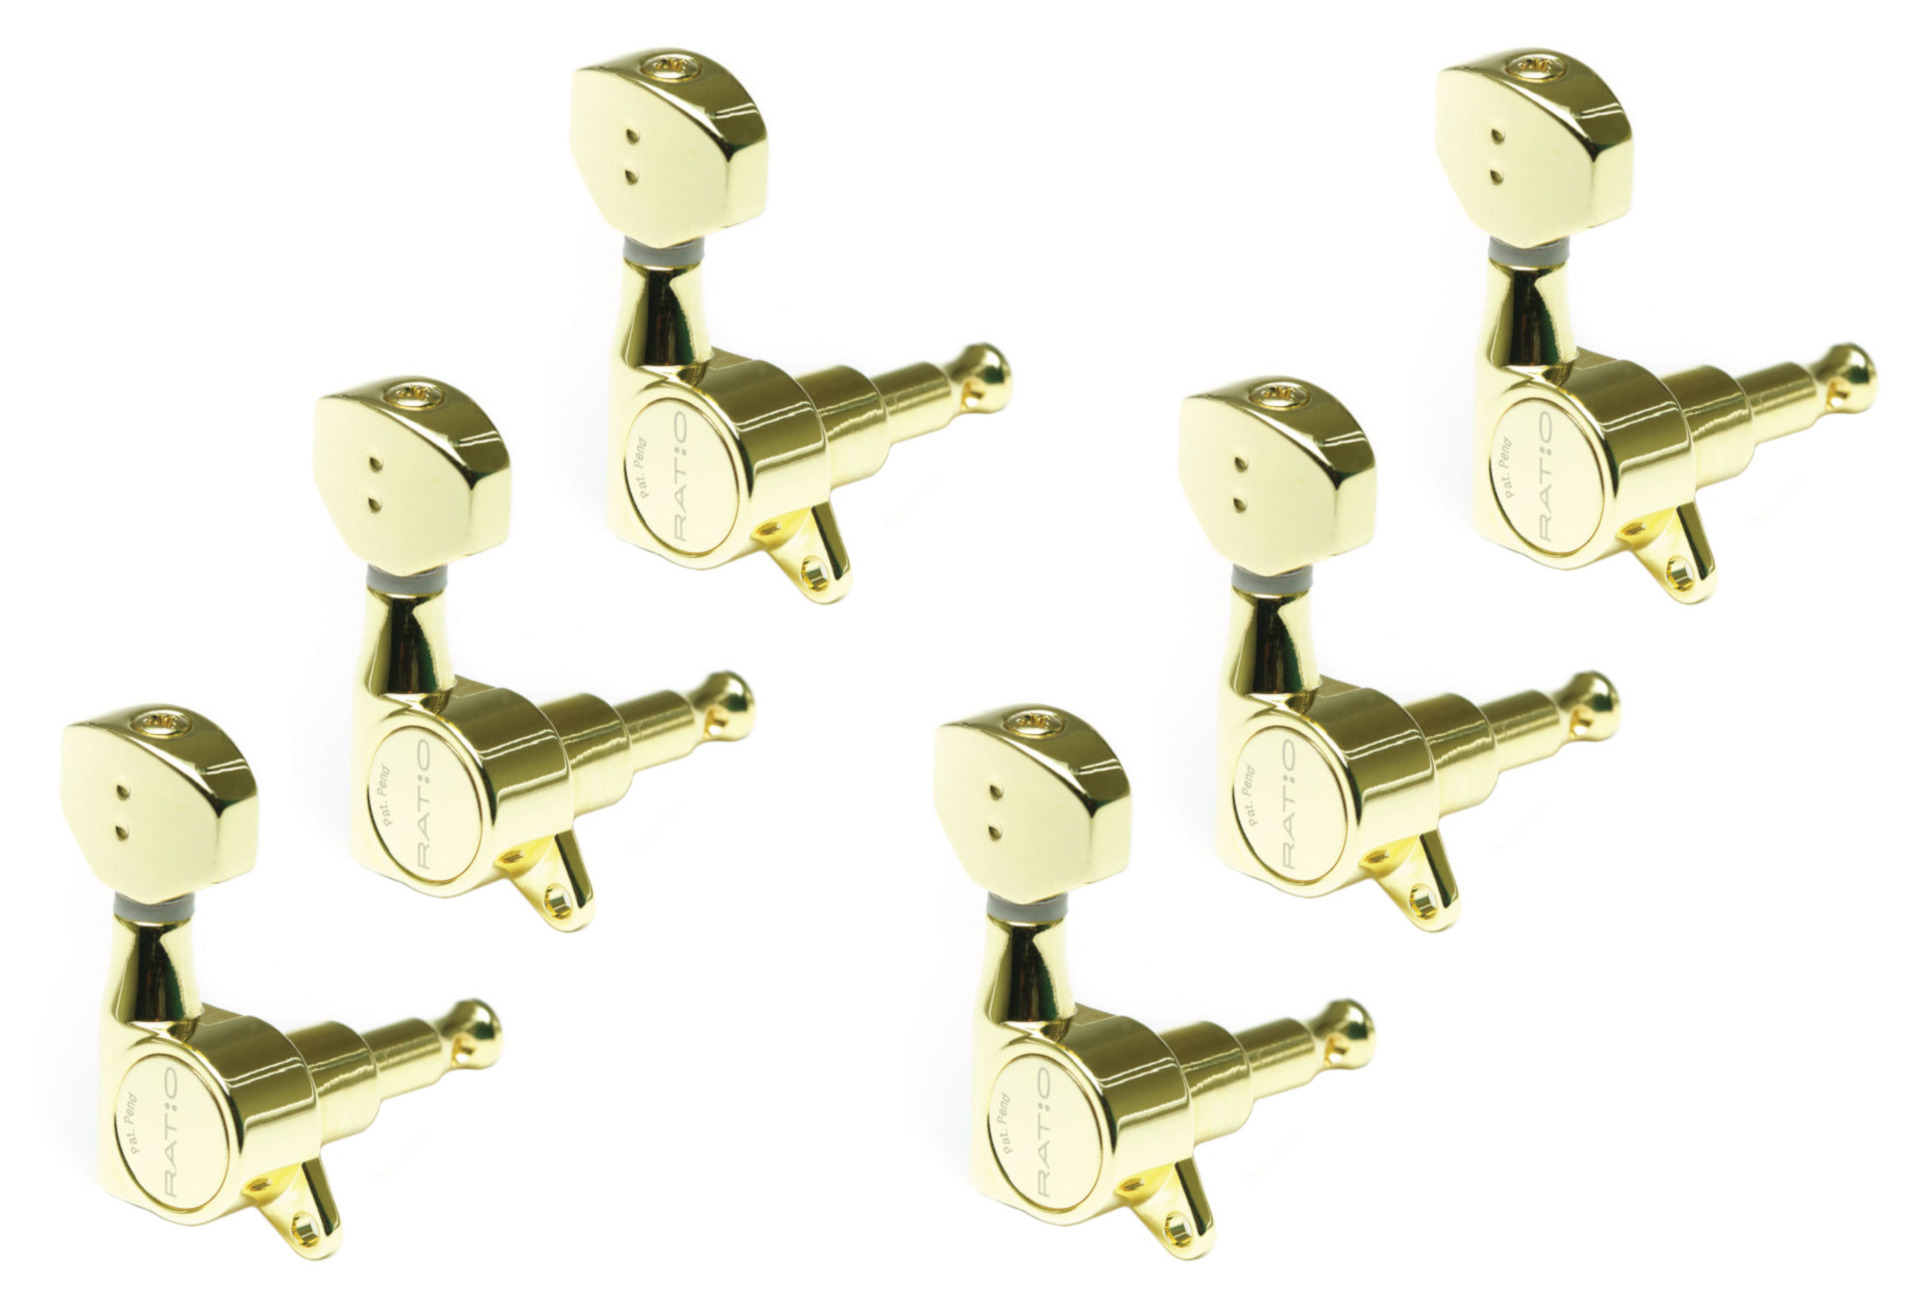 Graph Tech PRN-4721-G0 Ratio Electric Guitar Machine Heads with Mini Contemporary Button, Offset Screw - 6-in-Line, Bass Side (Left) - Gold